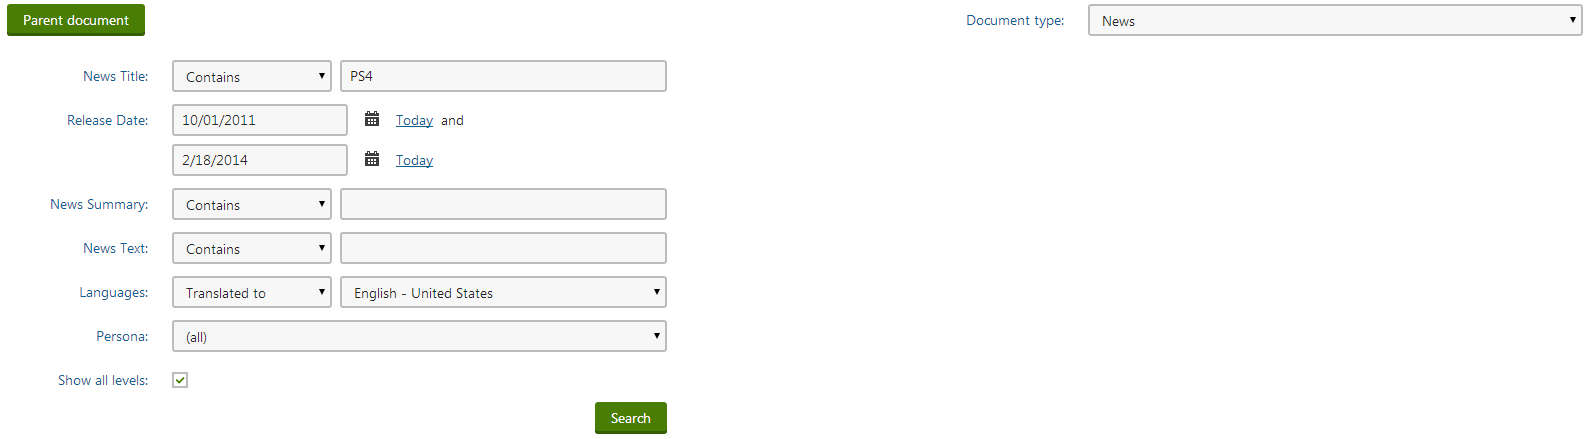 Filtering documents in Listing mode